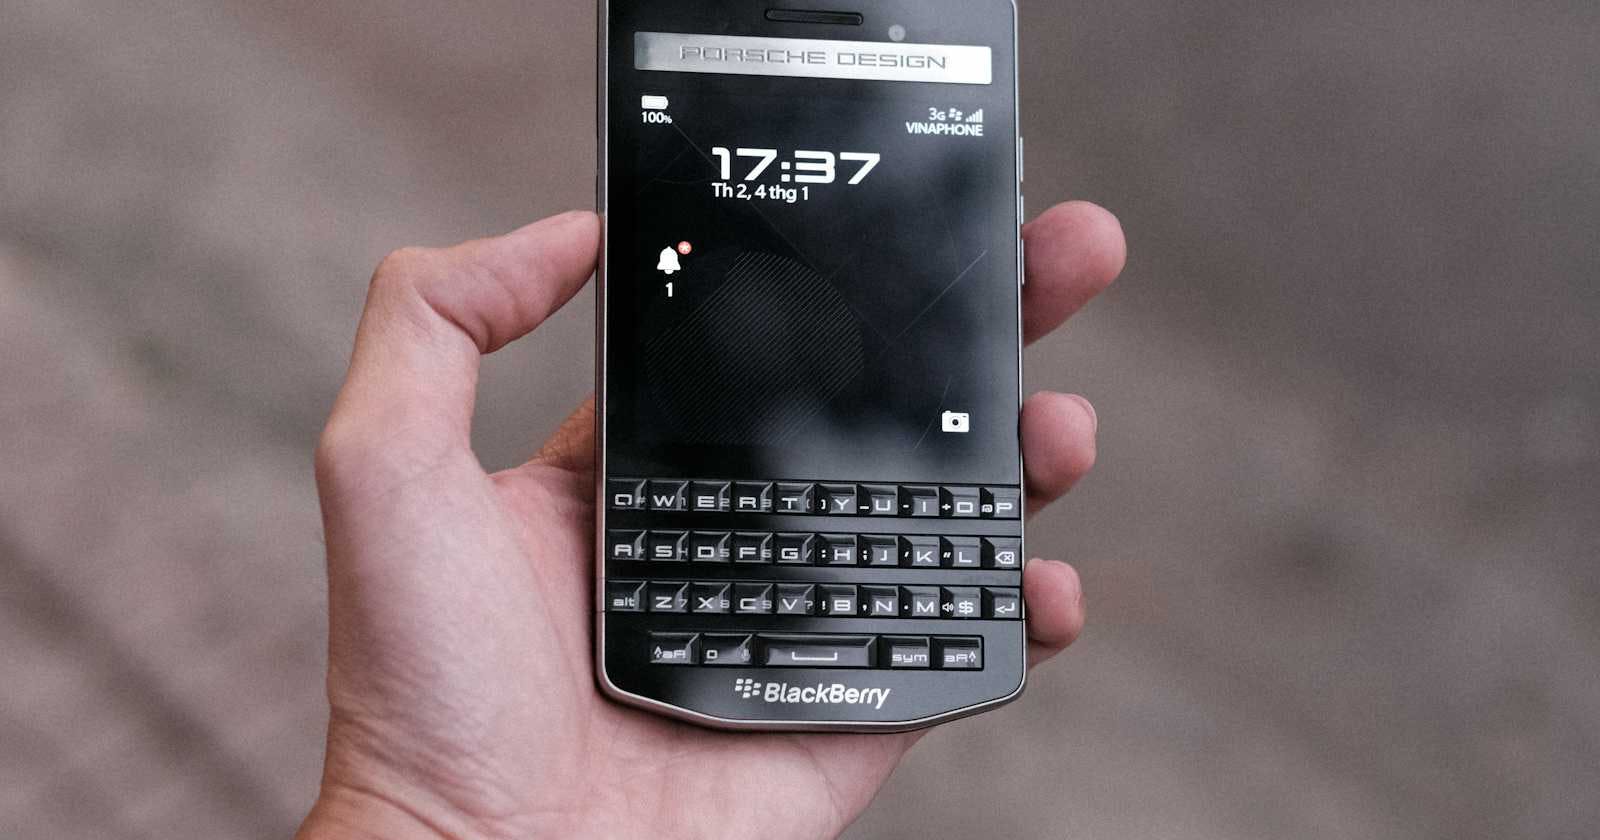 BlackBerry, a look back at one of the most iconic brands